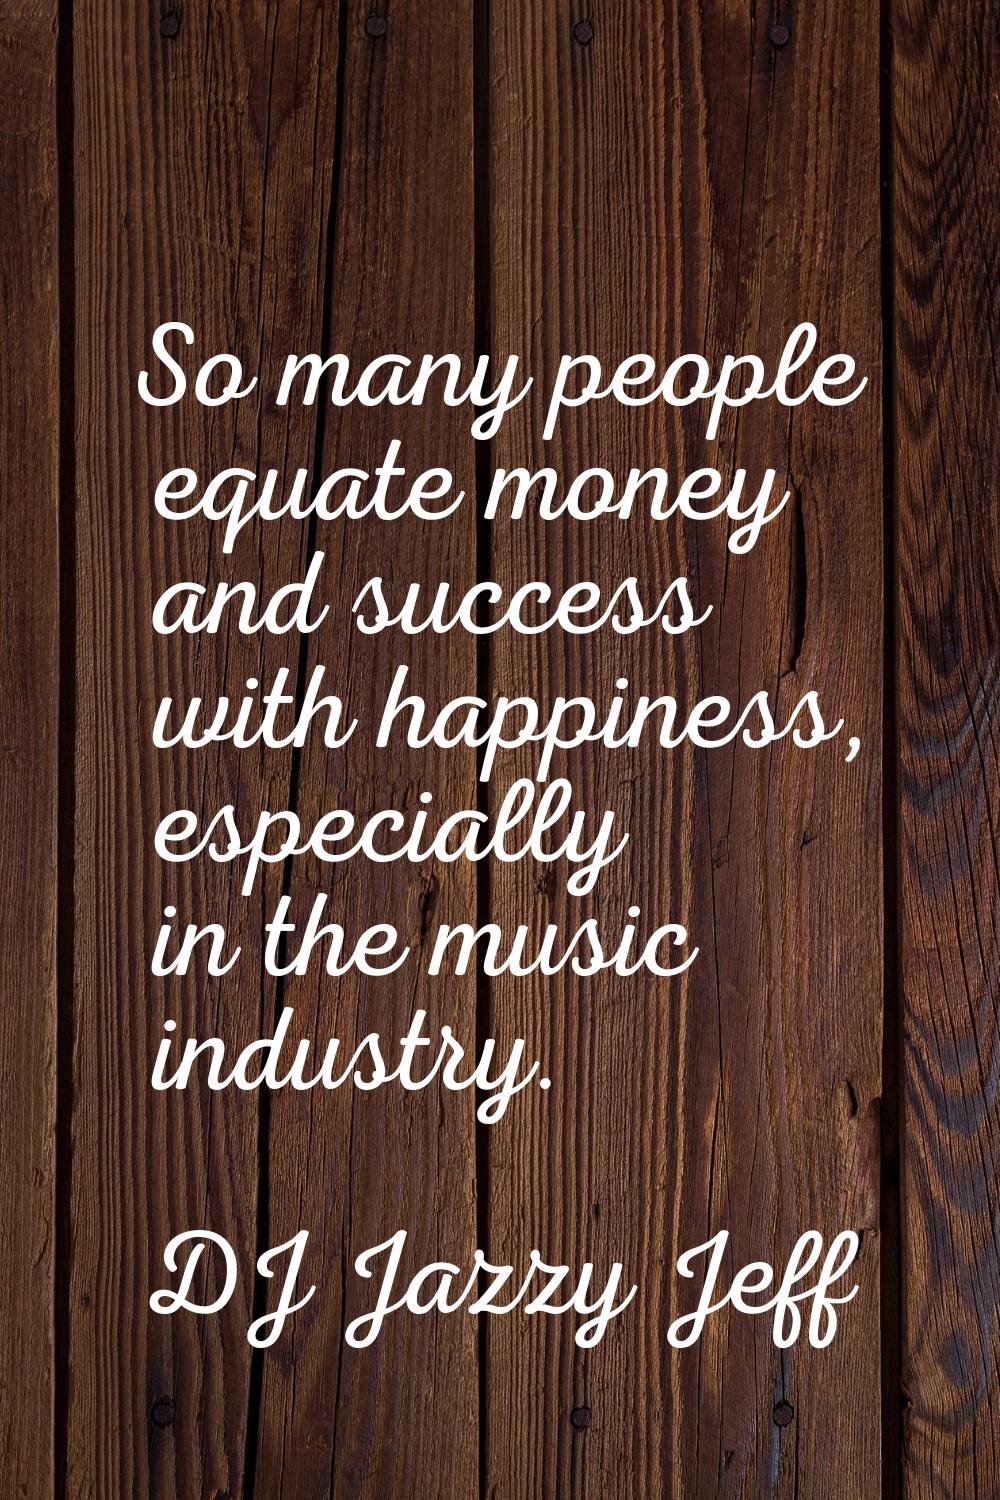 So many people equate money and success with happiness, especially in the music industry.